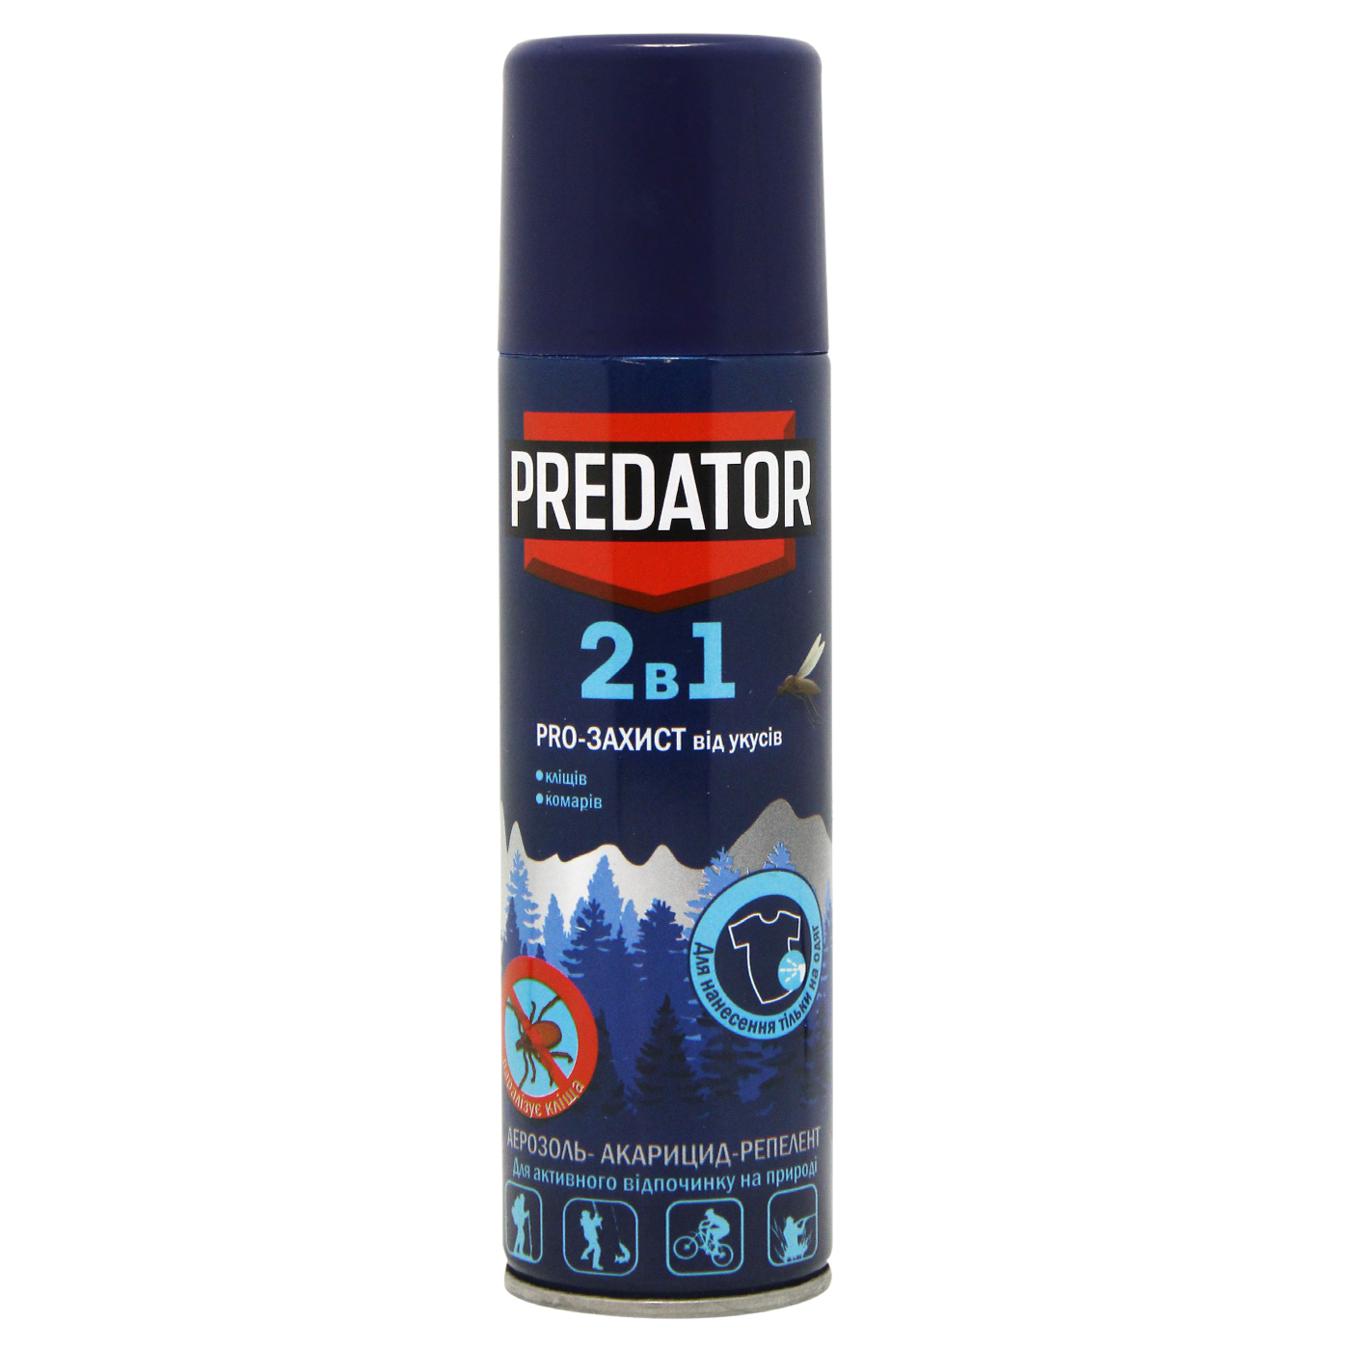 Aerosol Predator against mosquito bites and ticks 2 in 1 for application on clothes 150 ml